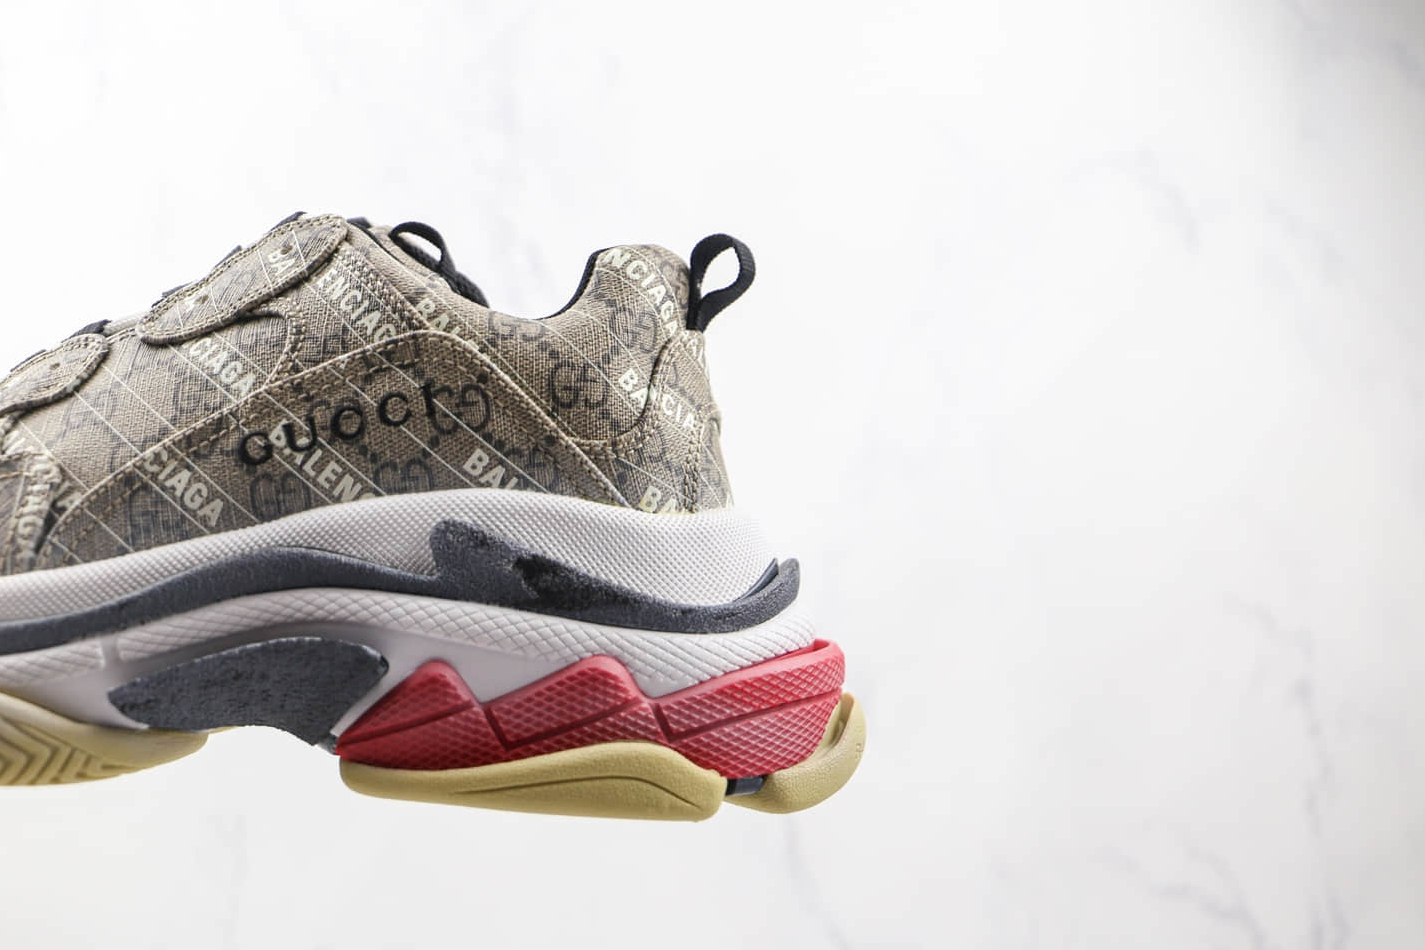 Gucci x Balenciaga Triple S Sneaker 'The Hacker Project Beige' 681066-ULZ10-9795 - Cutting-Edge Design & Unmatched Style